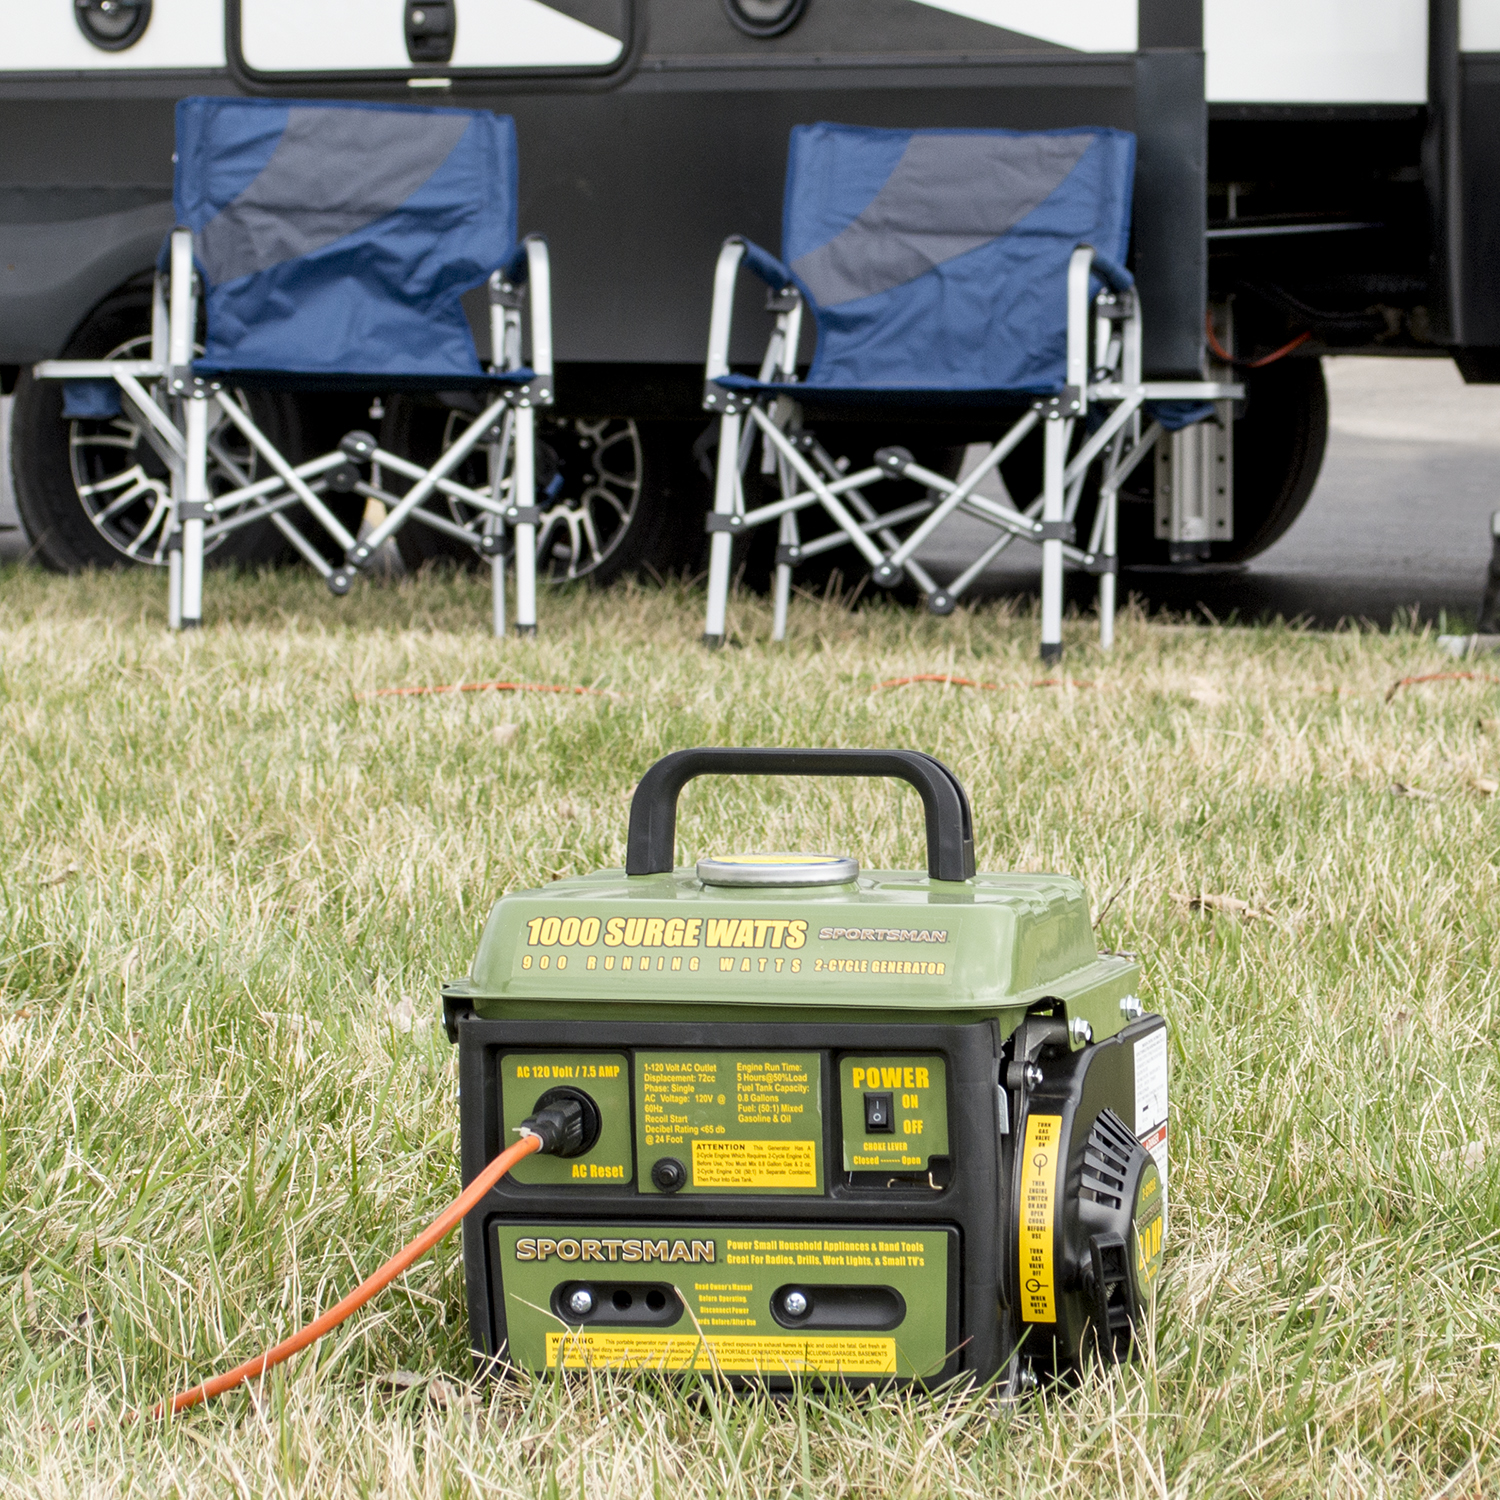 Small size and portable generator